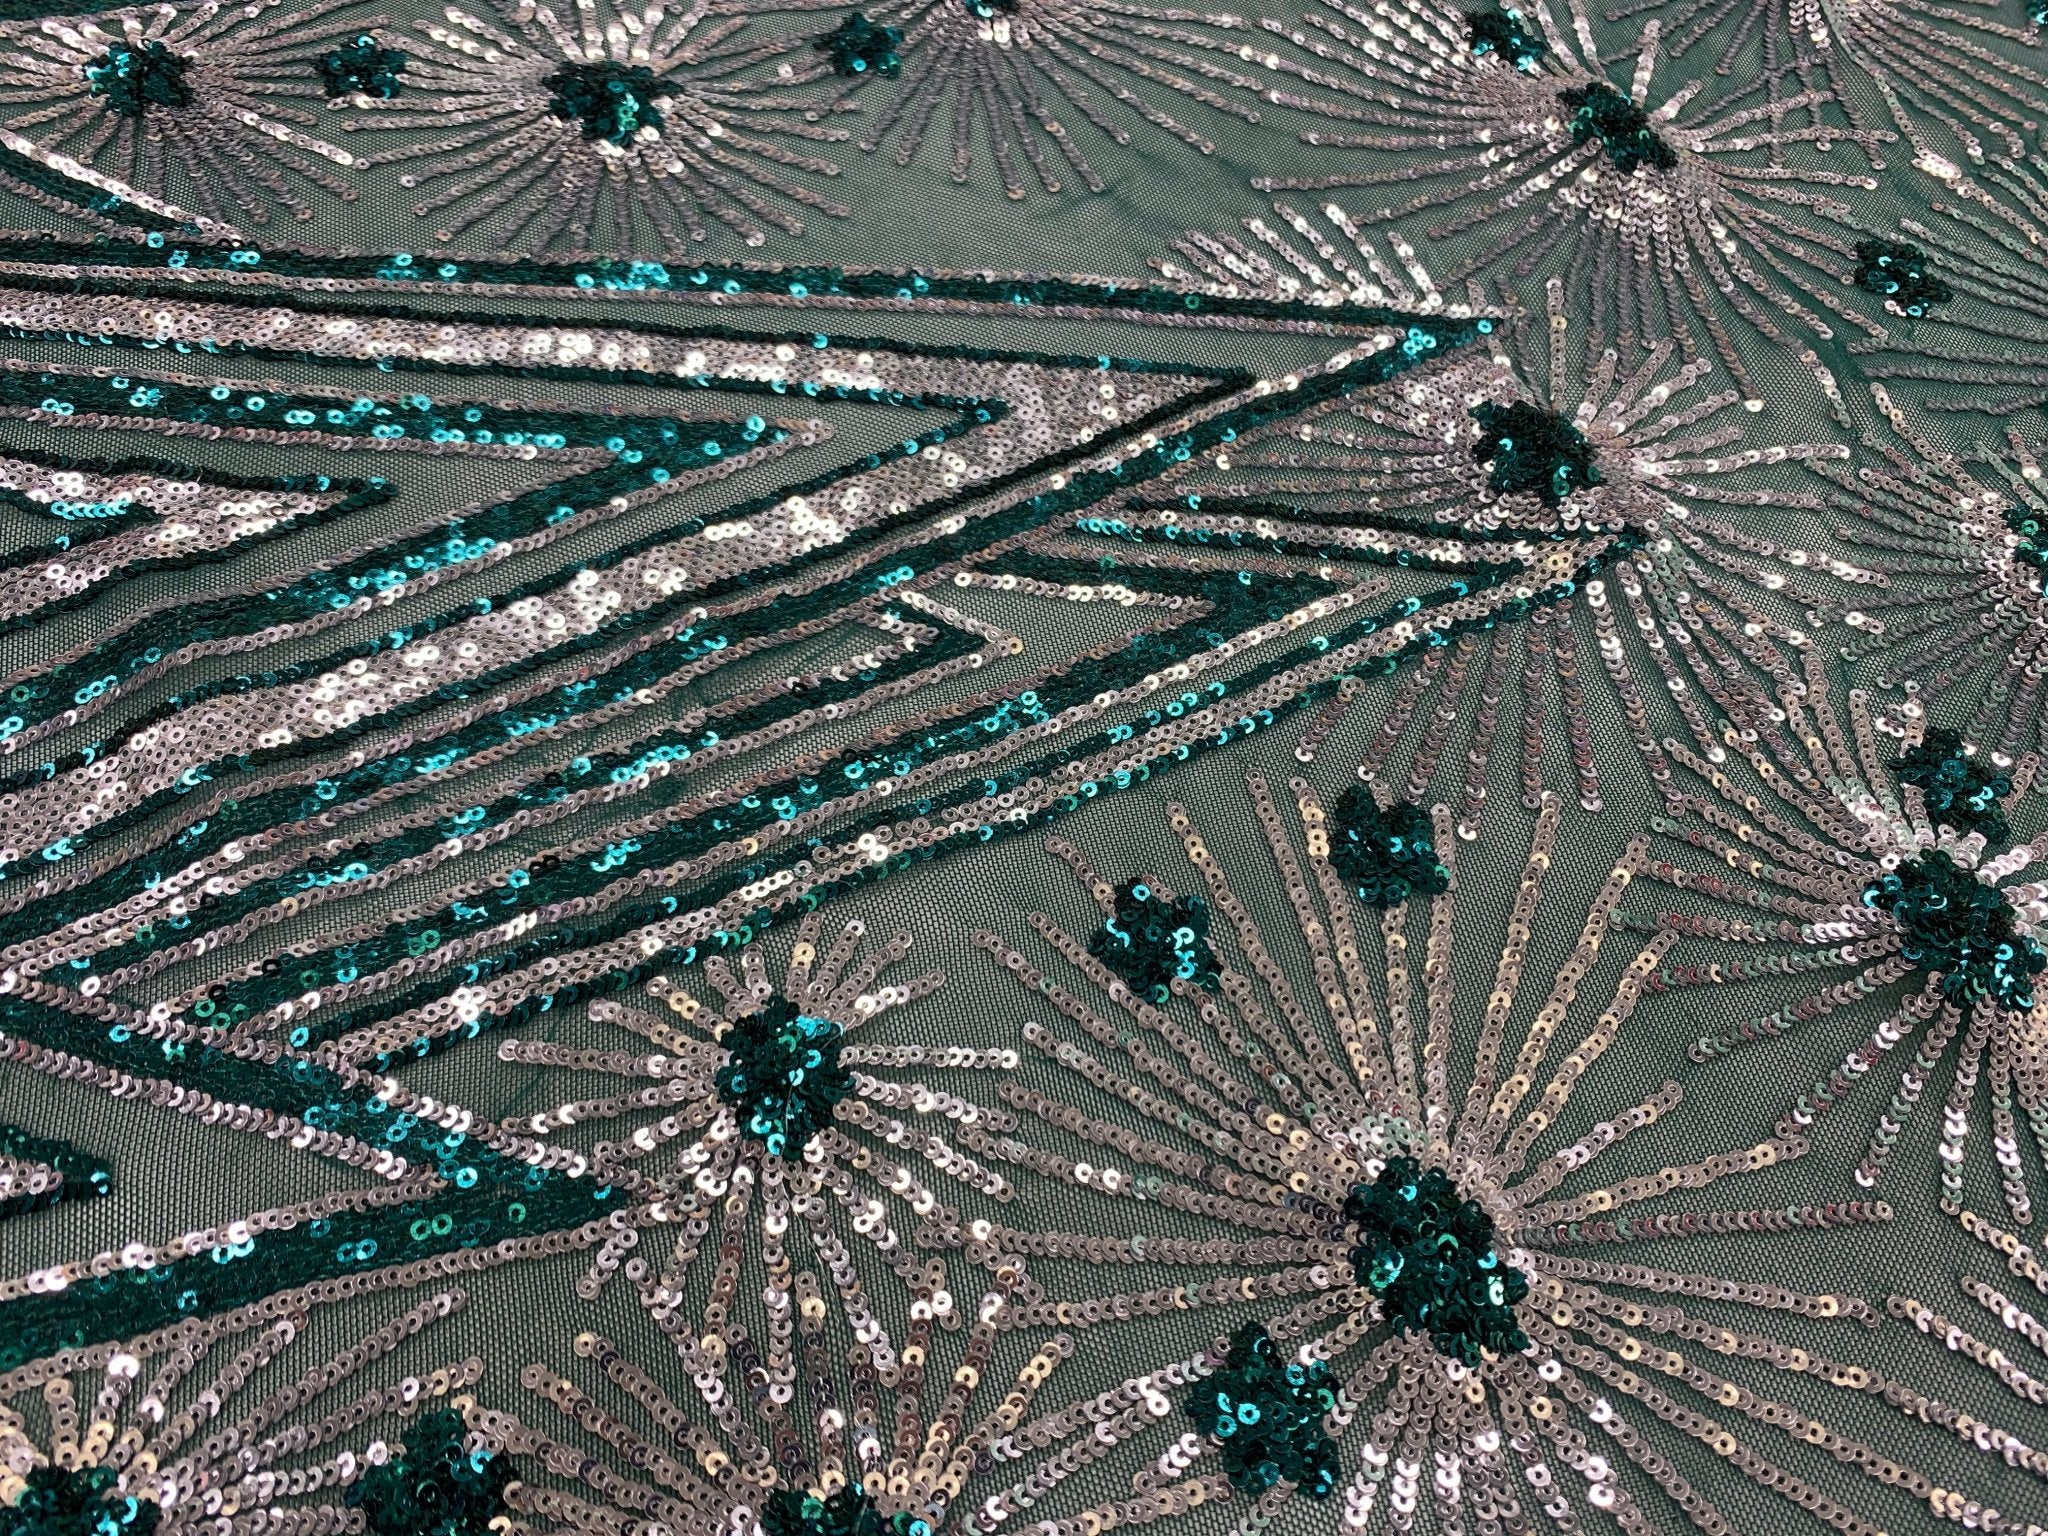 4 Way Stretch Iridescent Geometric Sequin Embroidered Mesh Lace FabricICEFABRICICE FABRICSHunter Green IridescentBy The Yard (58" Wide)4 Way Stretch Iridescent Geometric Sequin Embroidered Mesh Lace Fabric ICEFABRIC |Hunter Green Iridescent